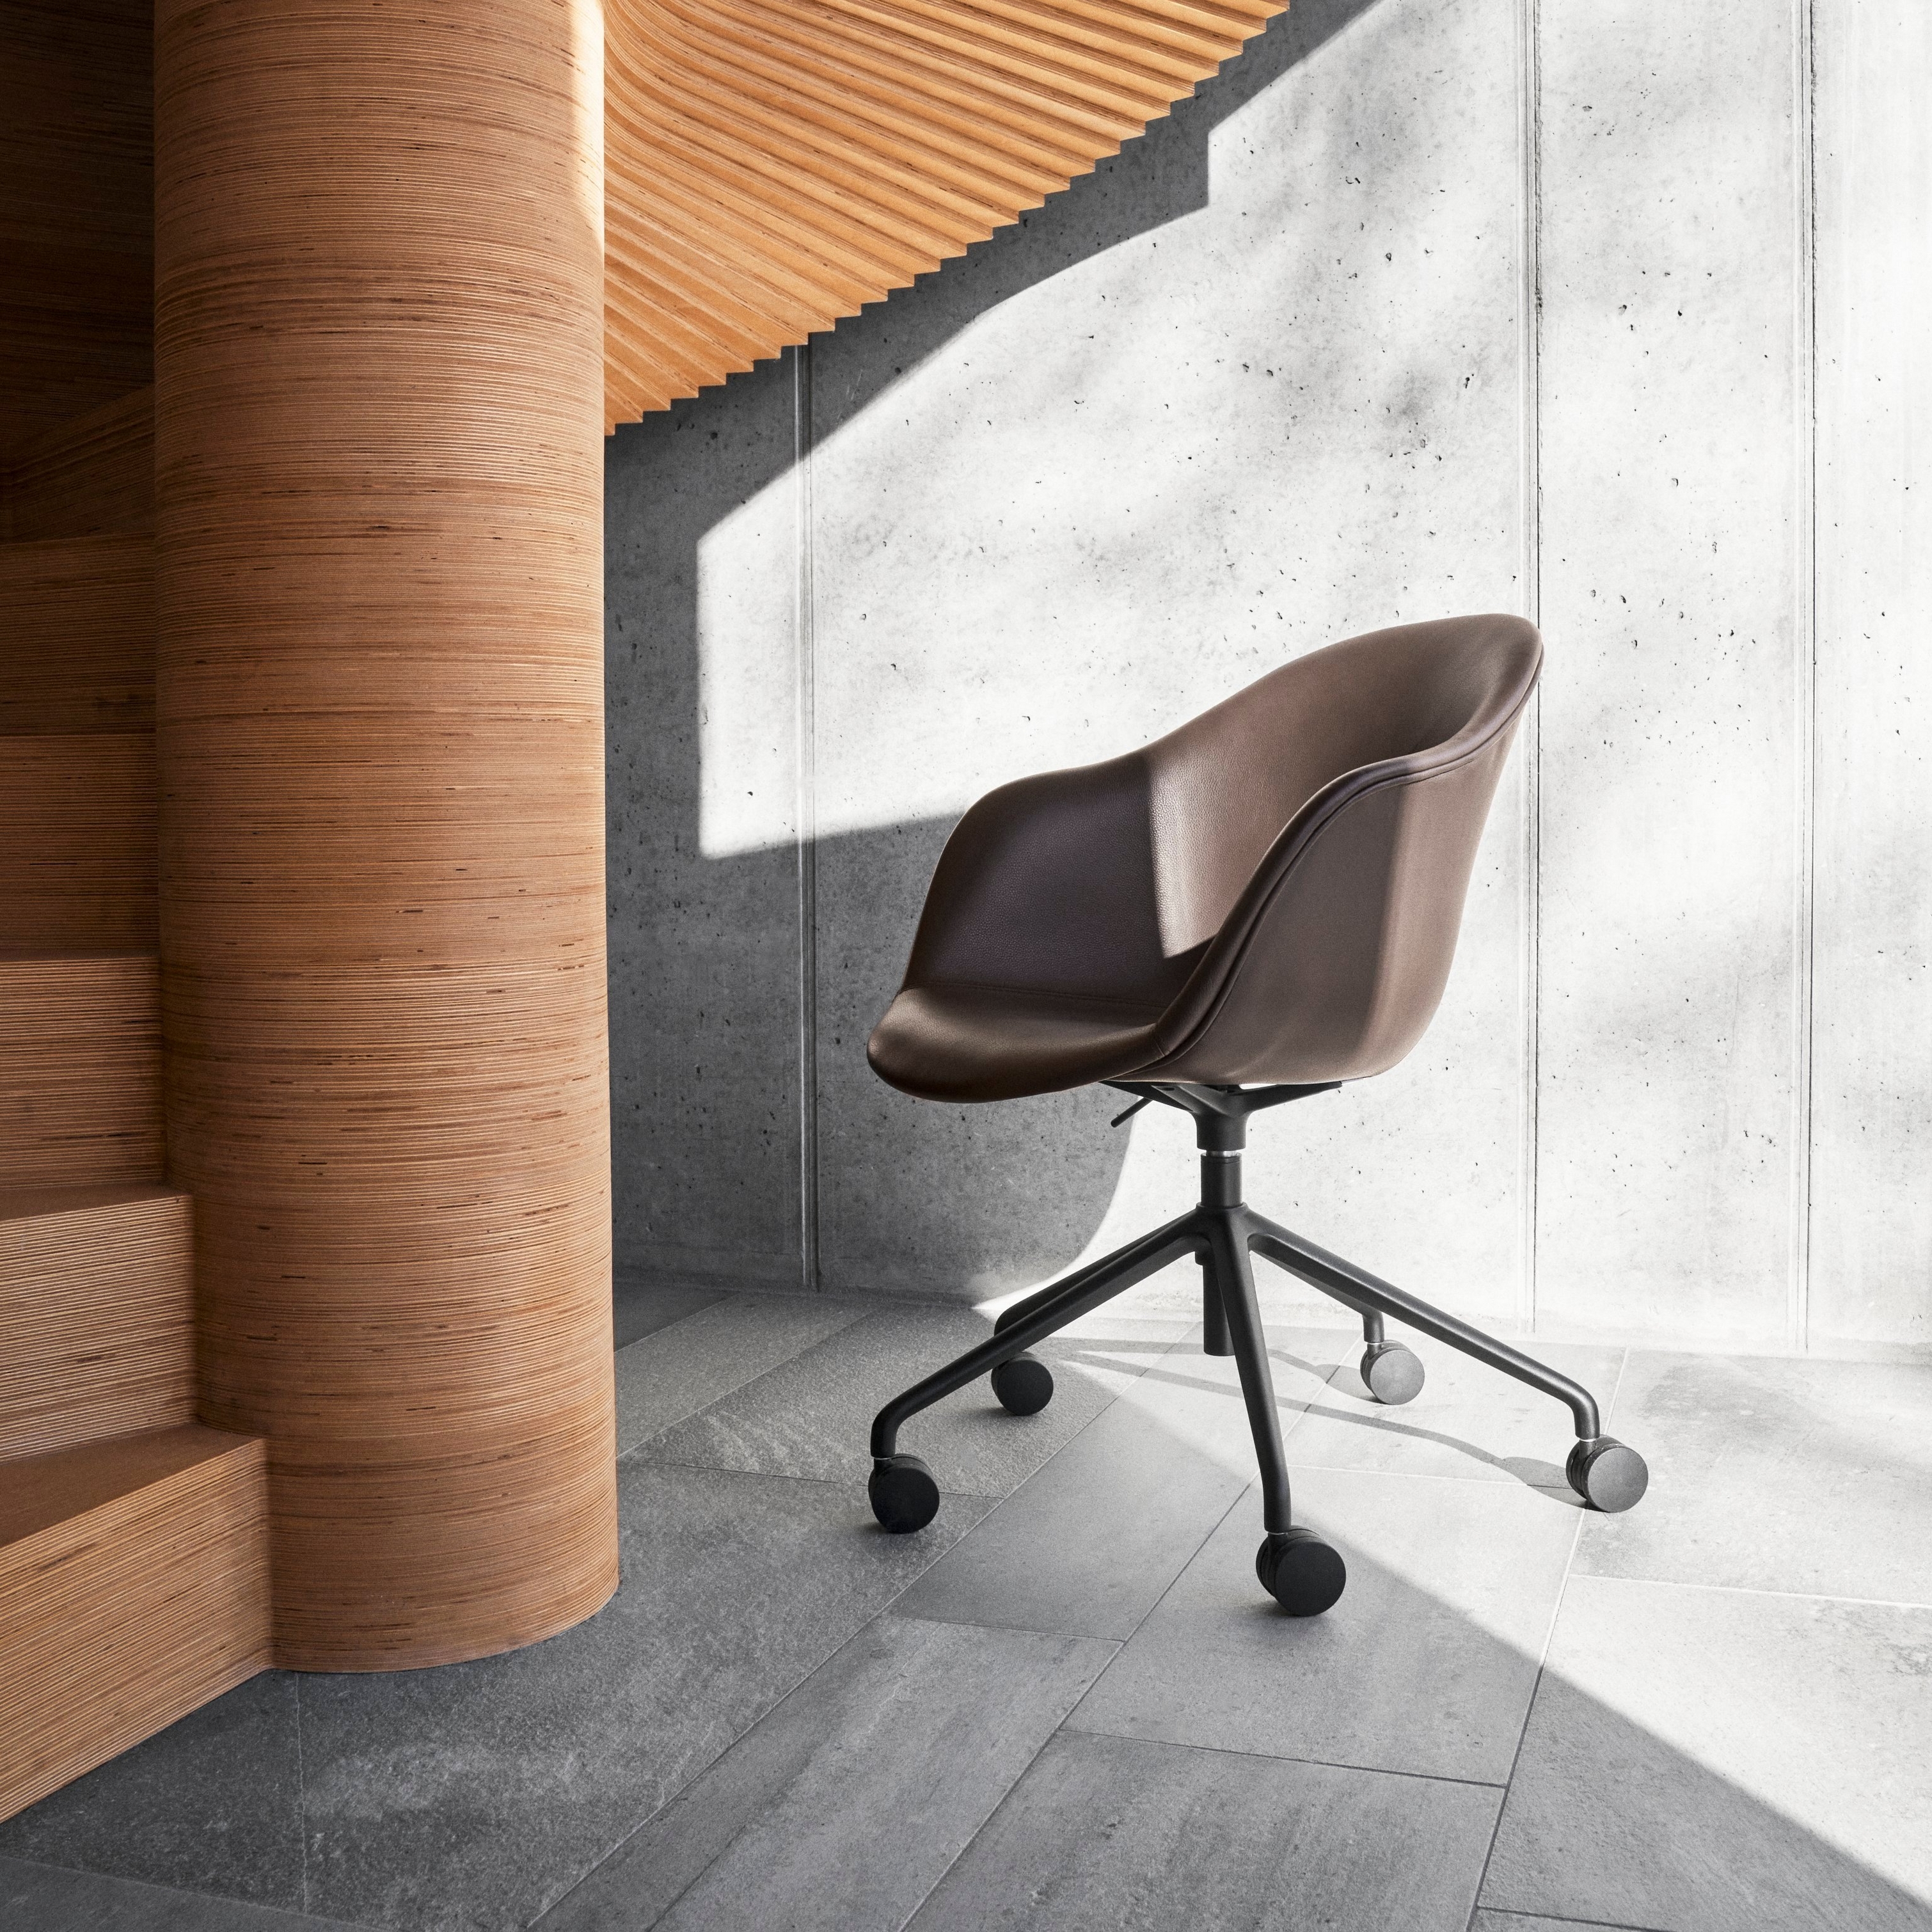 The Adelaide office chair styled next to a spiral staircase.